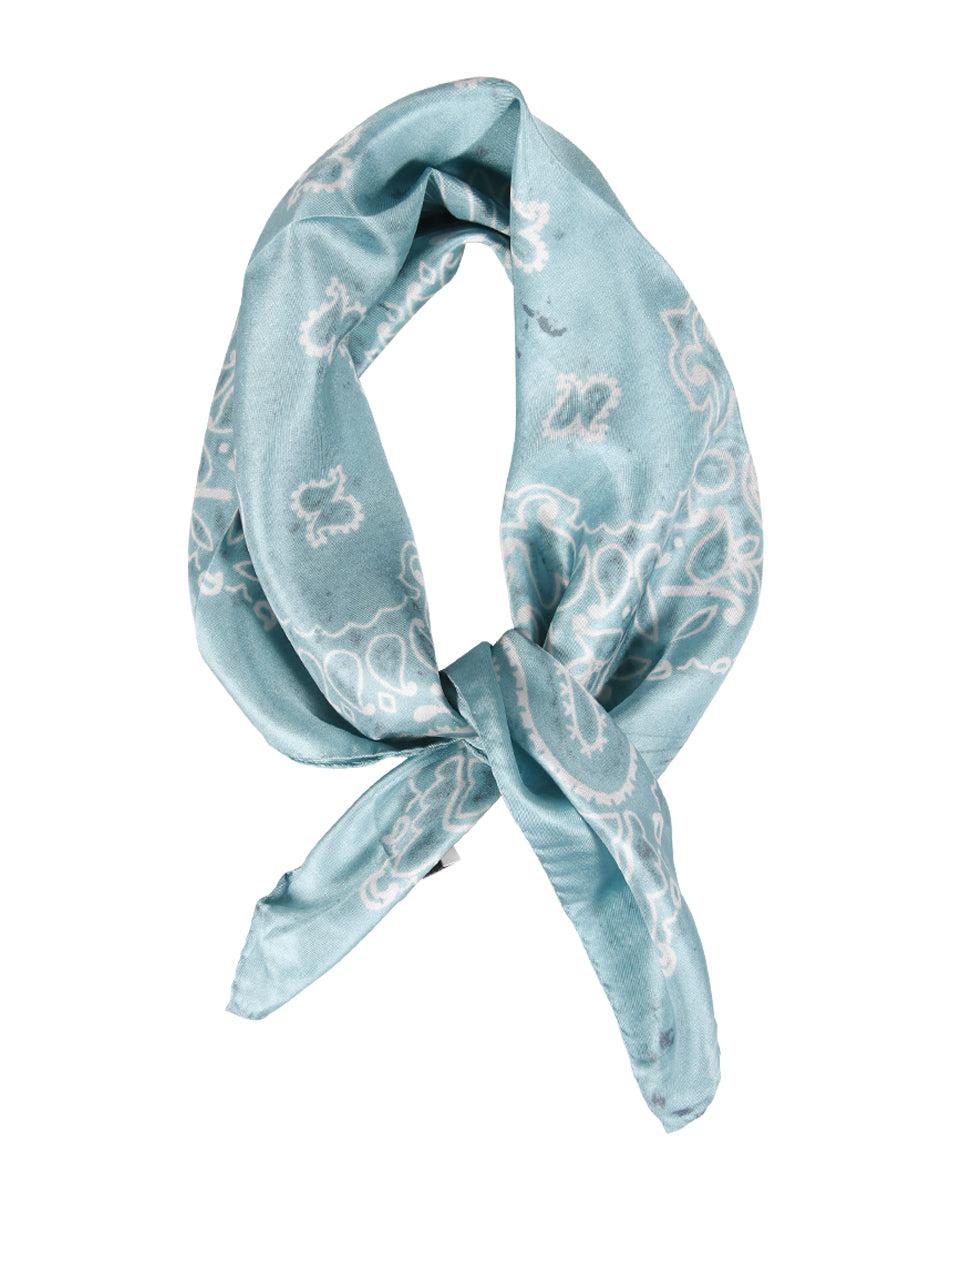 Golden Goose Paisley Print Distressed Effect Scarf